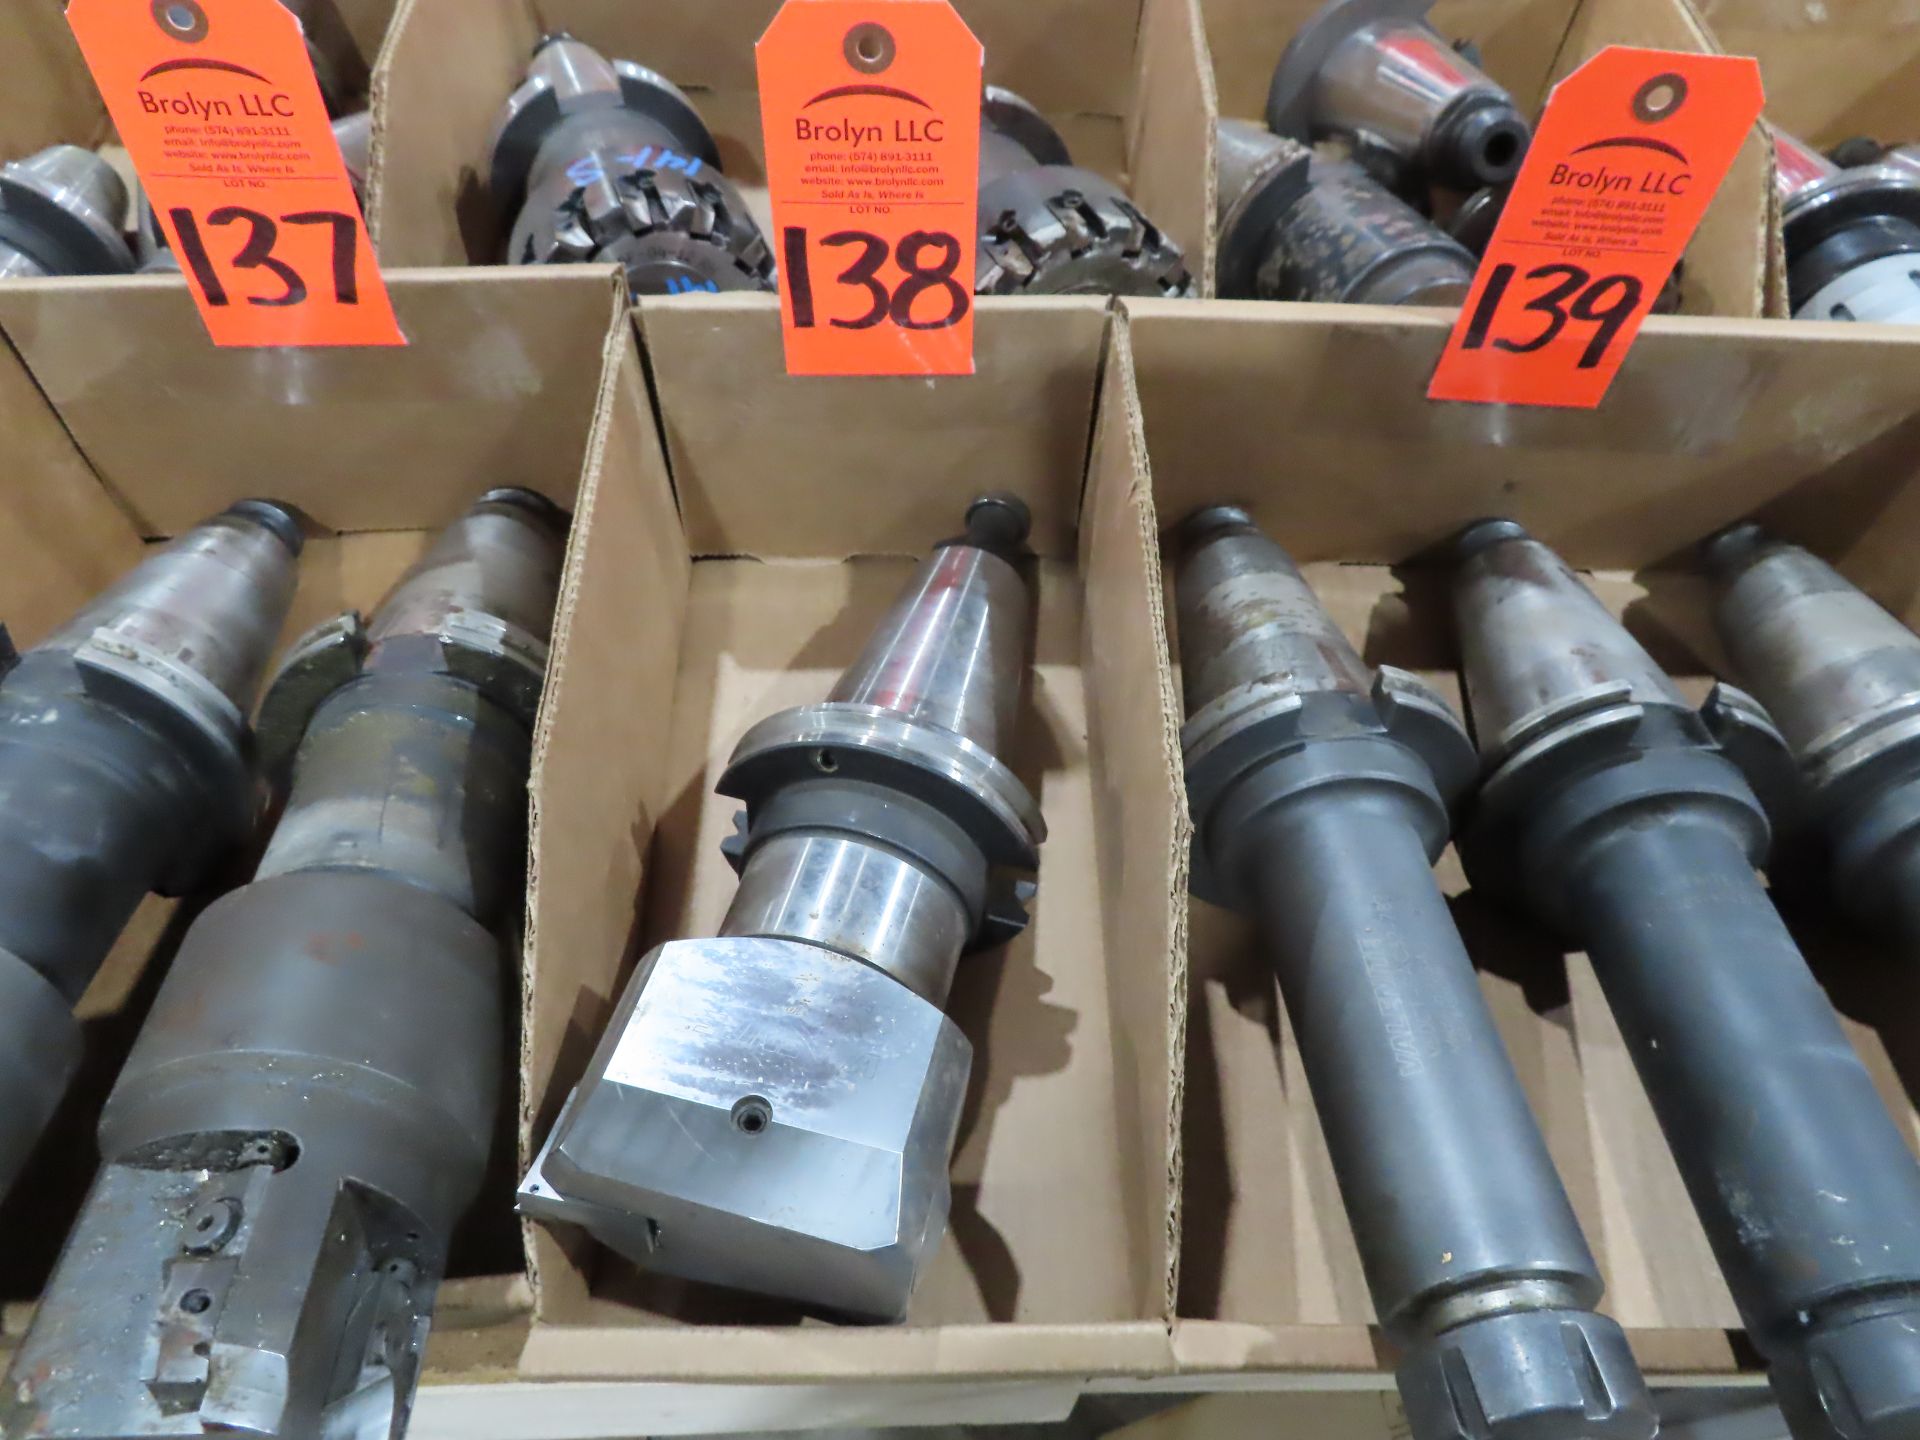 (Qty 1) Valenite CAT 50 assorted tooling. This item can be picked up onsite with no loading fee.